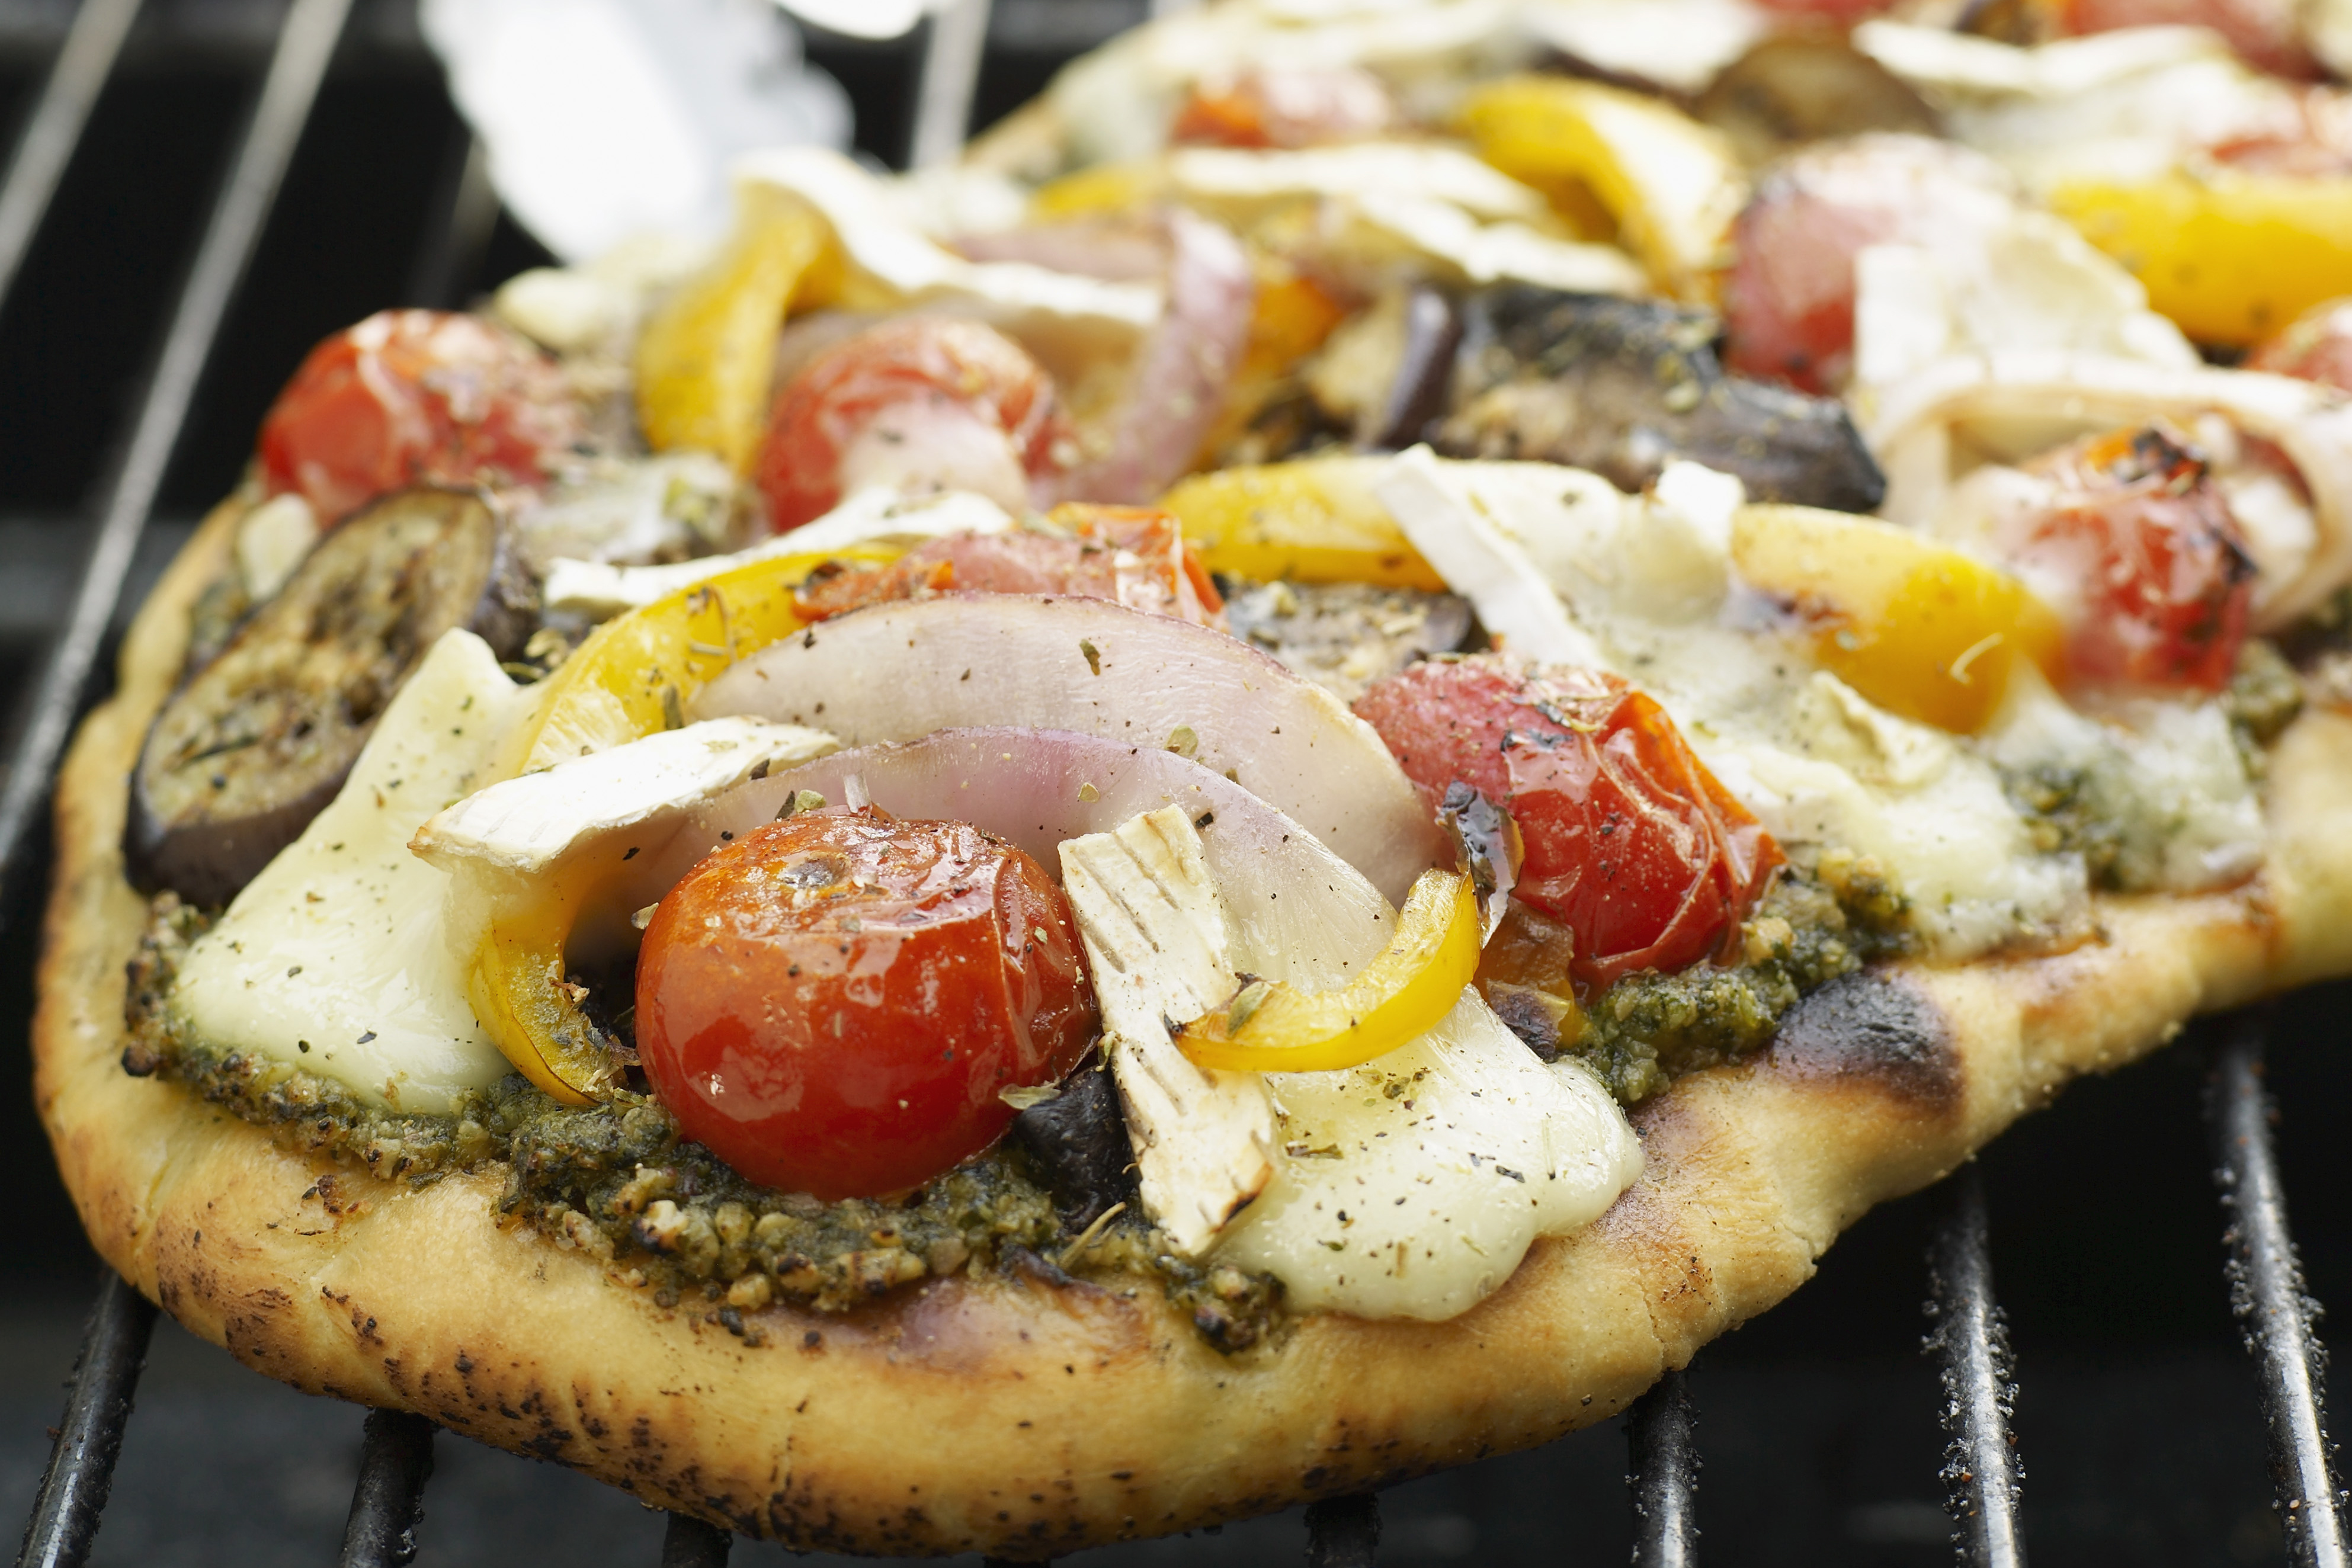 A pesto and vegetable pizza on the grill